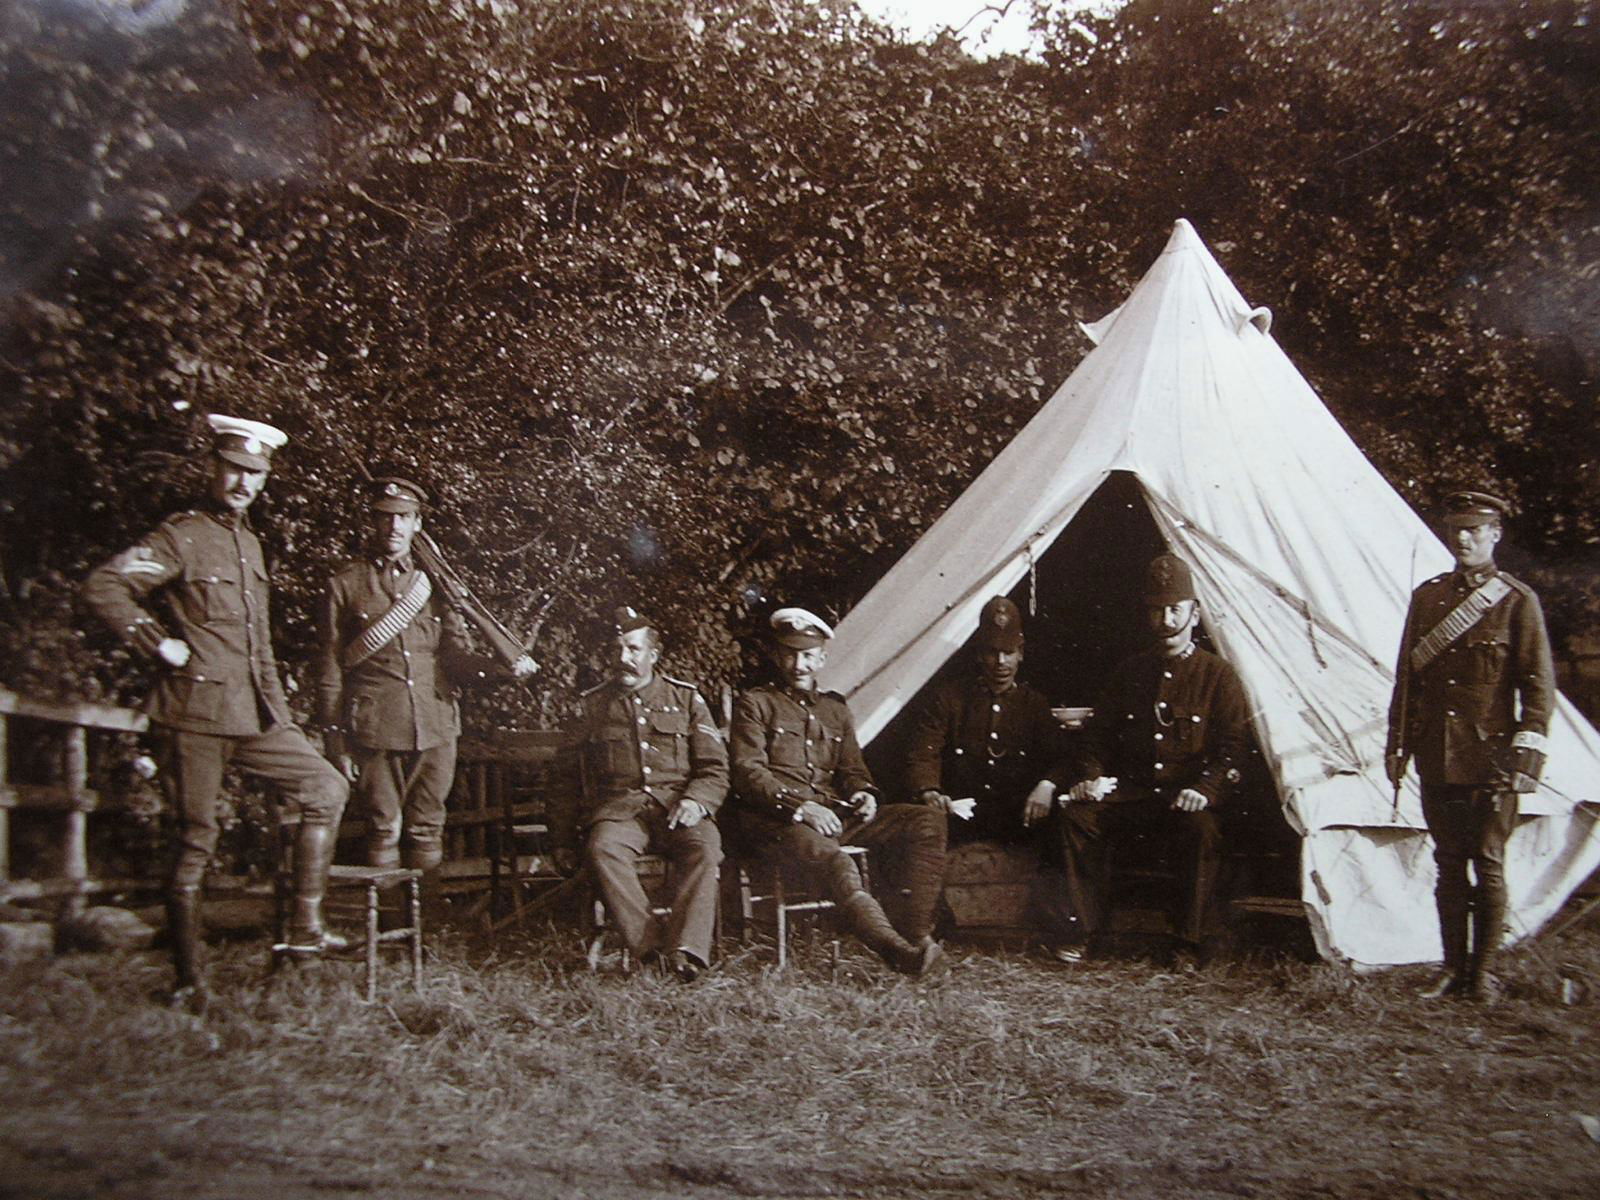 Quarter Guard tent with a 'C' Squadron (Australasian) Corporal and two Trooper of the King’s Colonials guarding ‘prisoners’ (two Buckinghamshire and Hertfordshire policemen and a Royal Army Medical Corps Corporal) at Latimer Camp in 1903. The King’s Colonial’s Trooper on the far right is wearing a cloth band with RMP for Regimental Military Police around his lower left sleeve cuff.